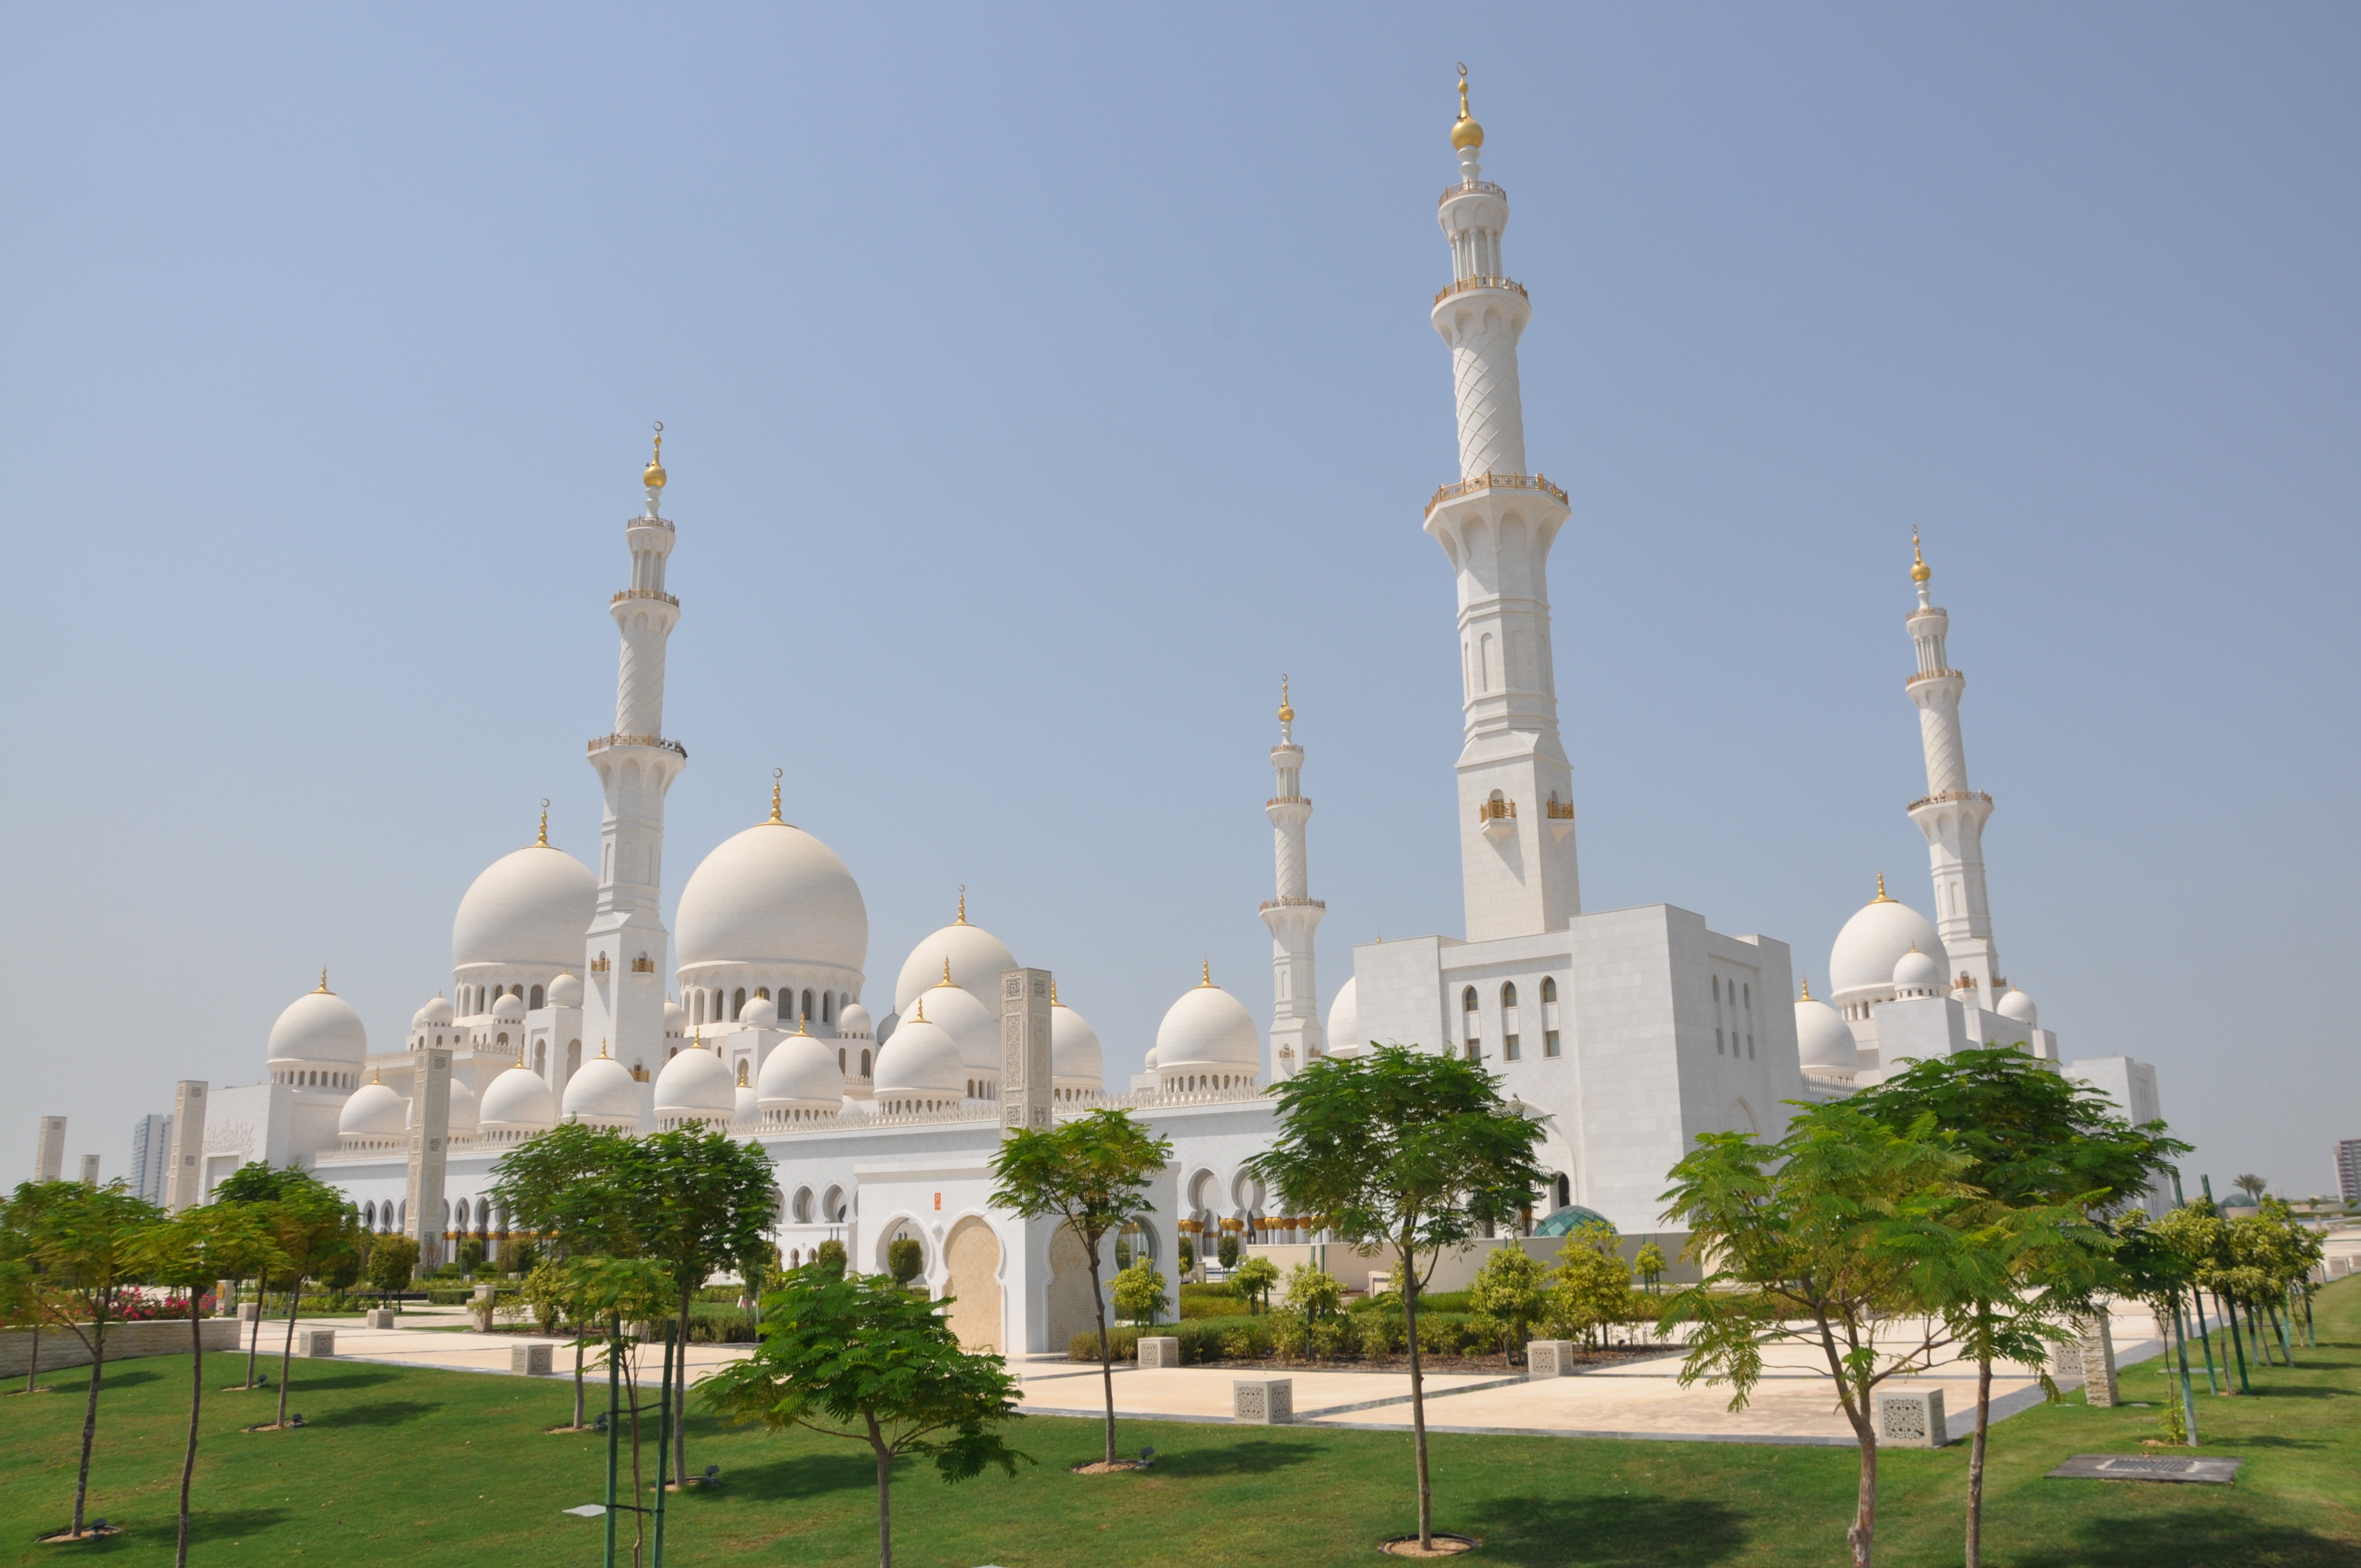 Pre-prayer ablutions at Sheikh Zayed Grand Mosque